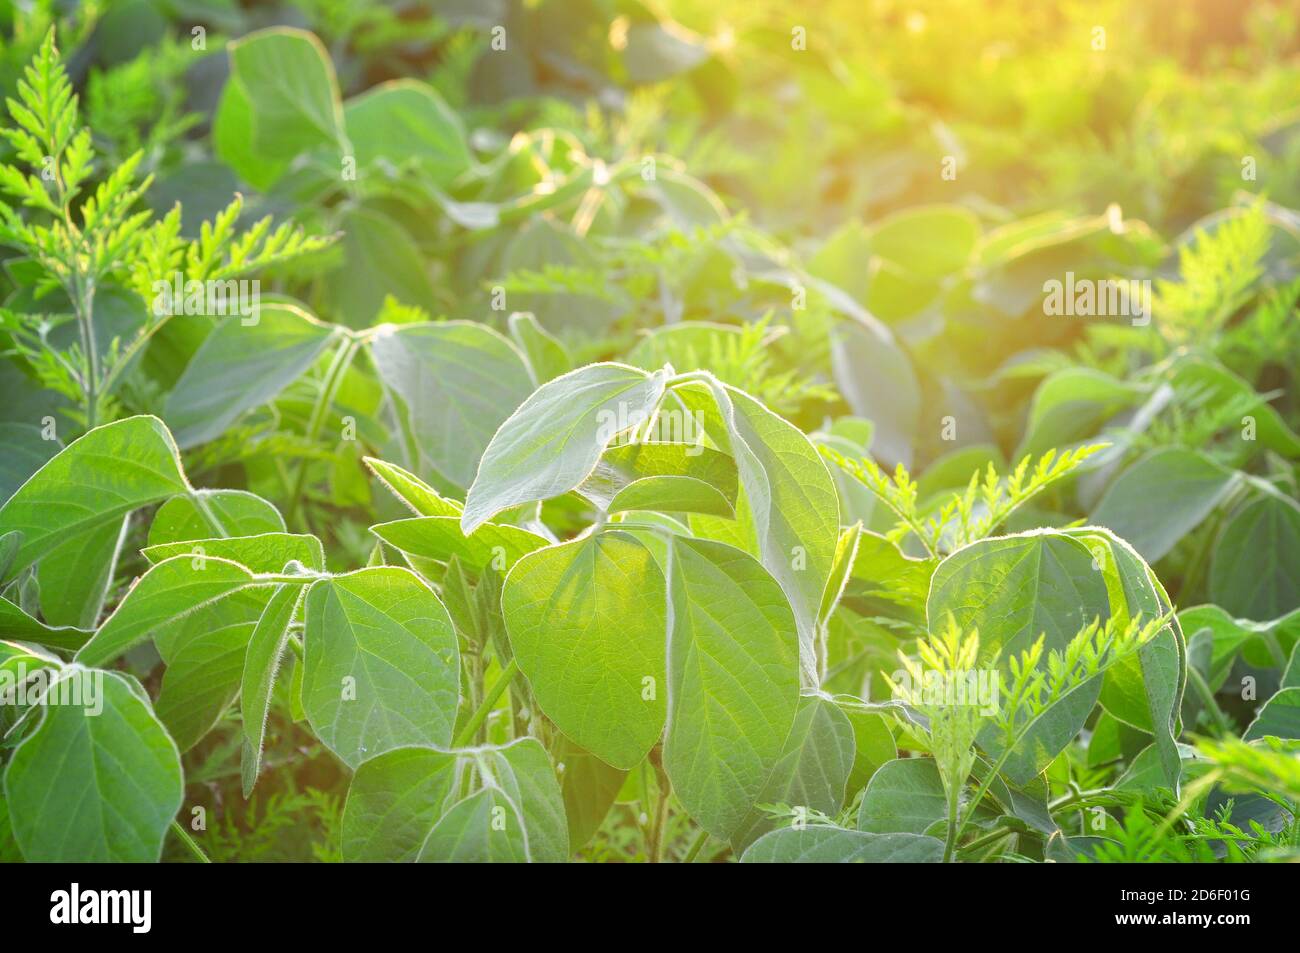 Soy plants with ragweed, Ambrosia artemisiifolia, one of the major and most invasive weeds Stock Photo